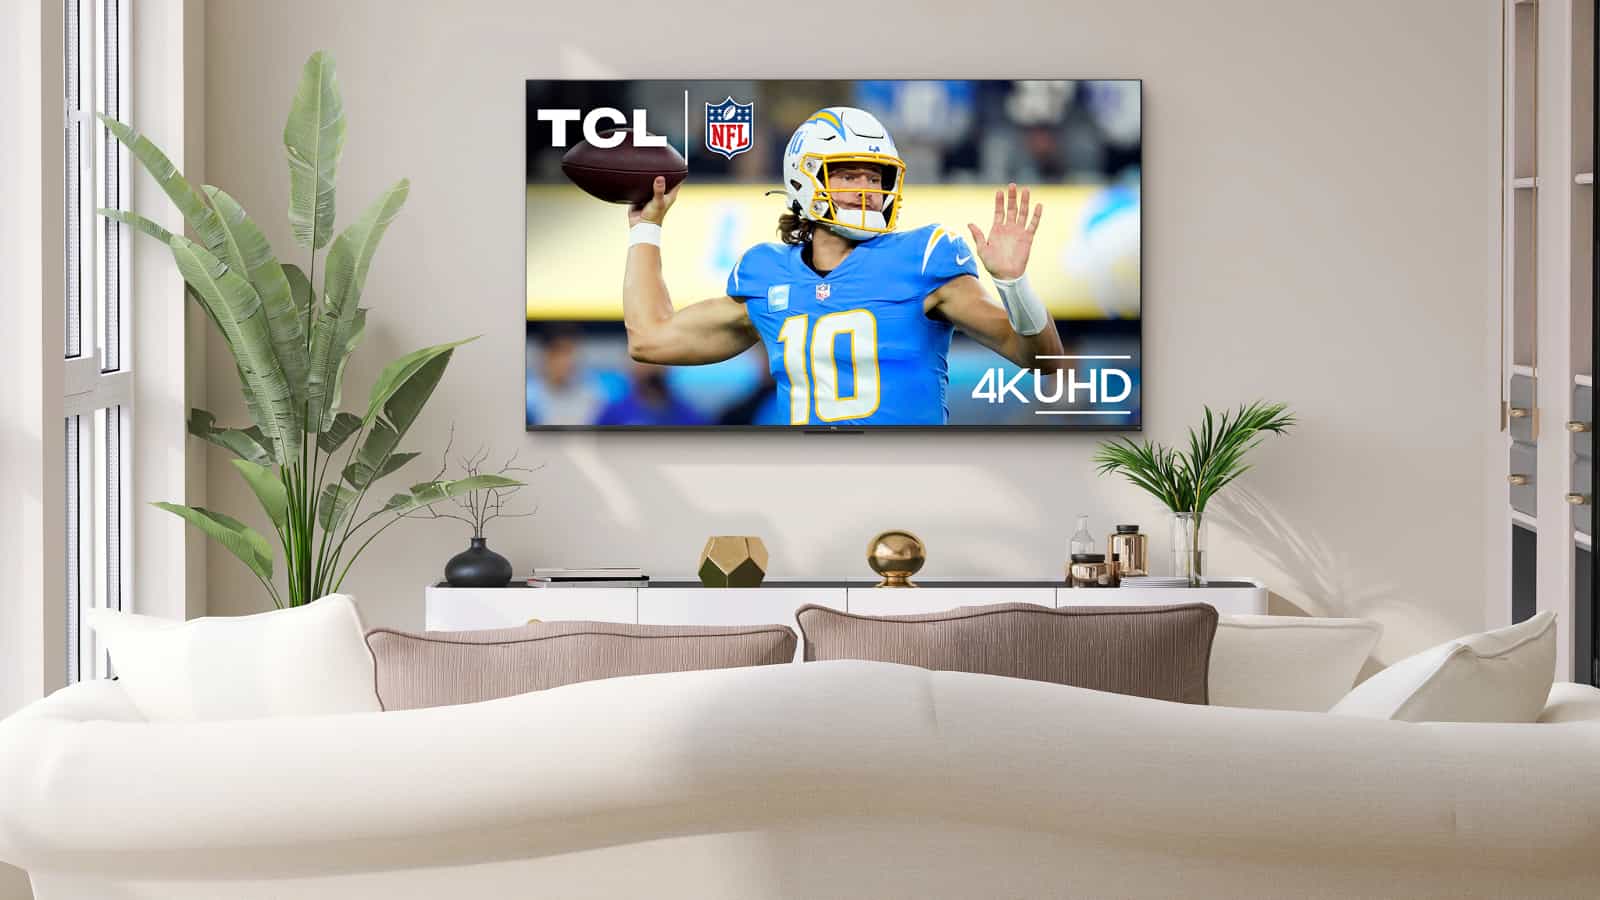 Super steal: This 43-inch TCL 4K TV is down to $200